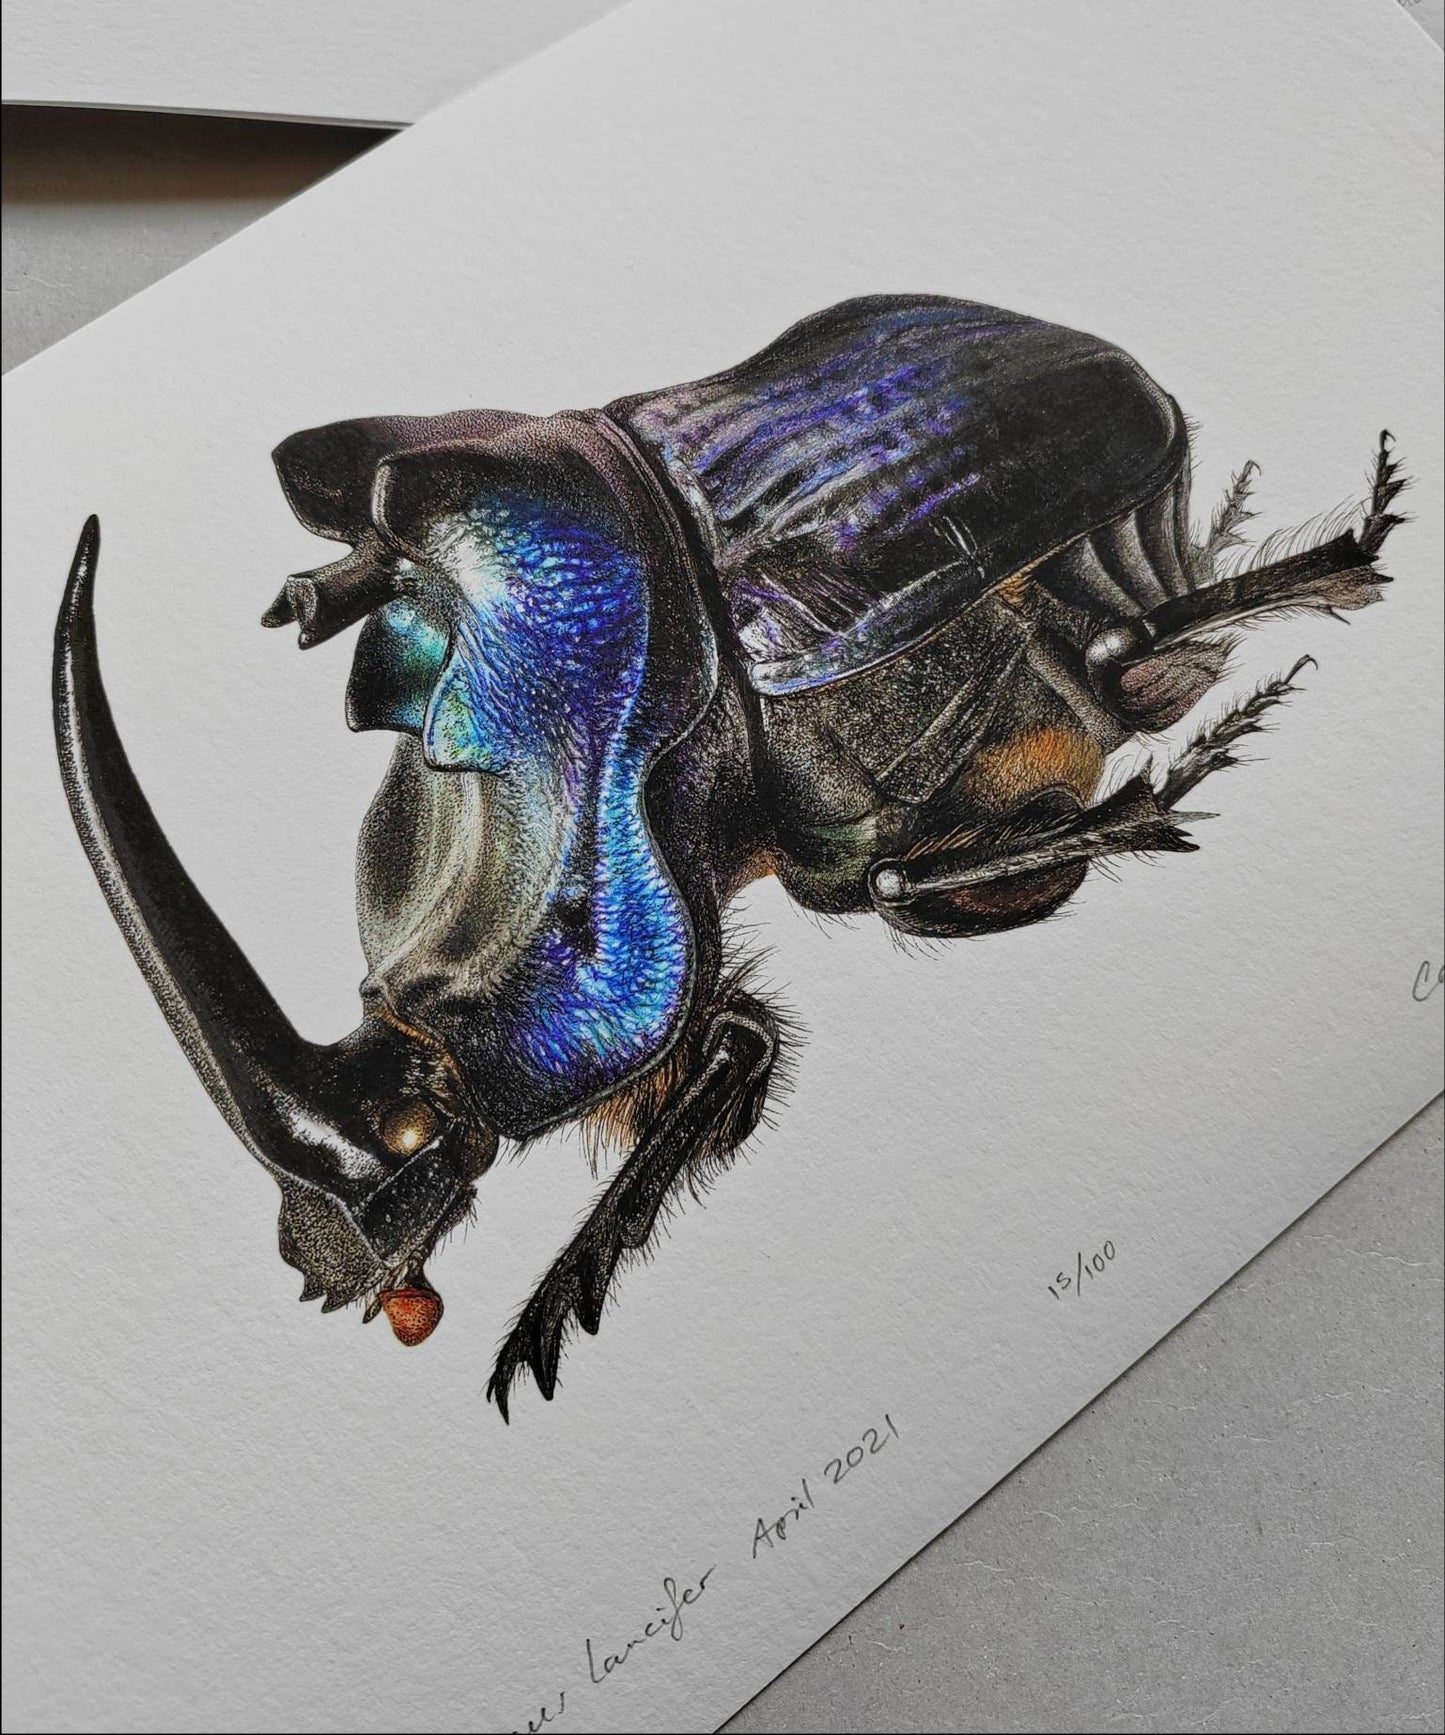 Coprophanaeus lancifer A4 size limited edition art print, signed and numbered. Scarab Beetle